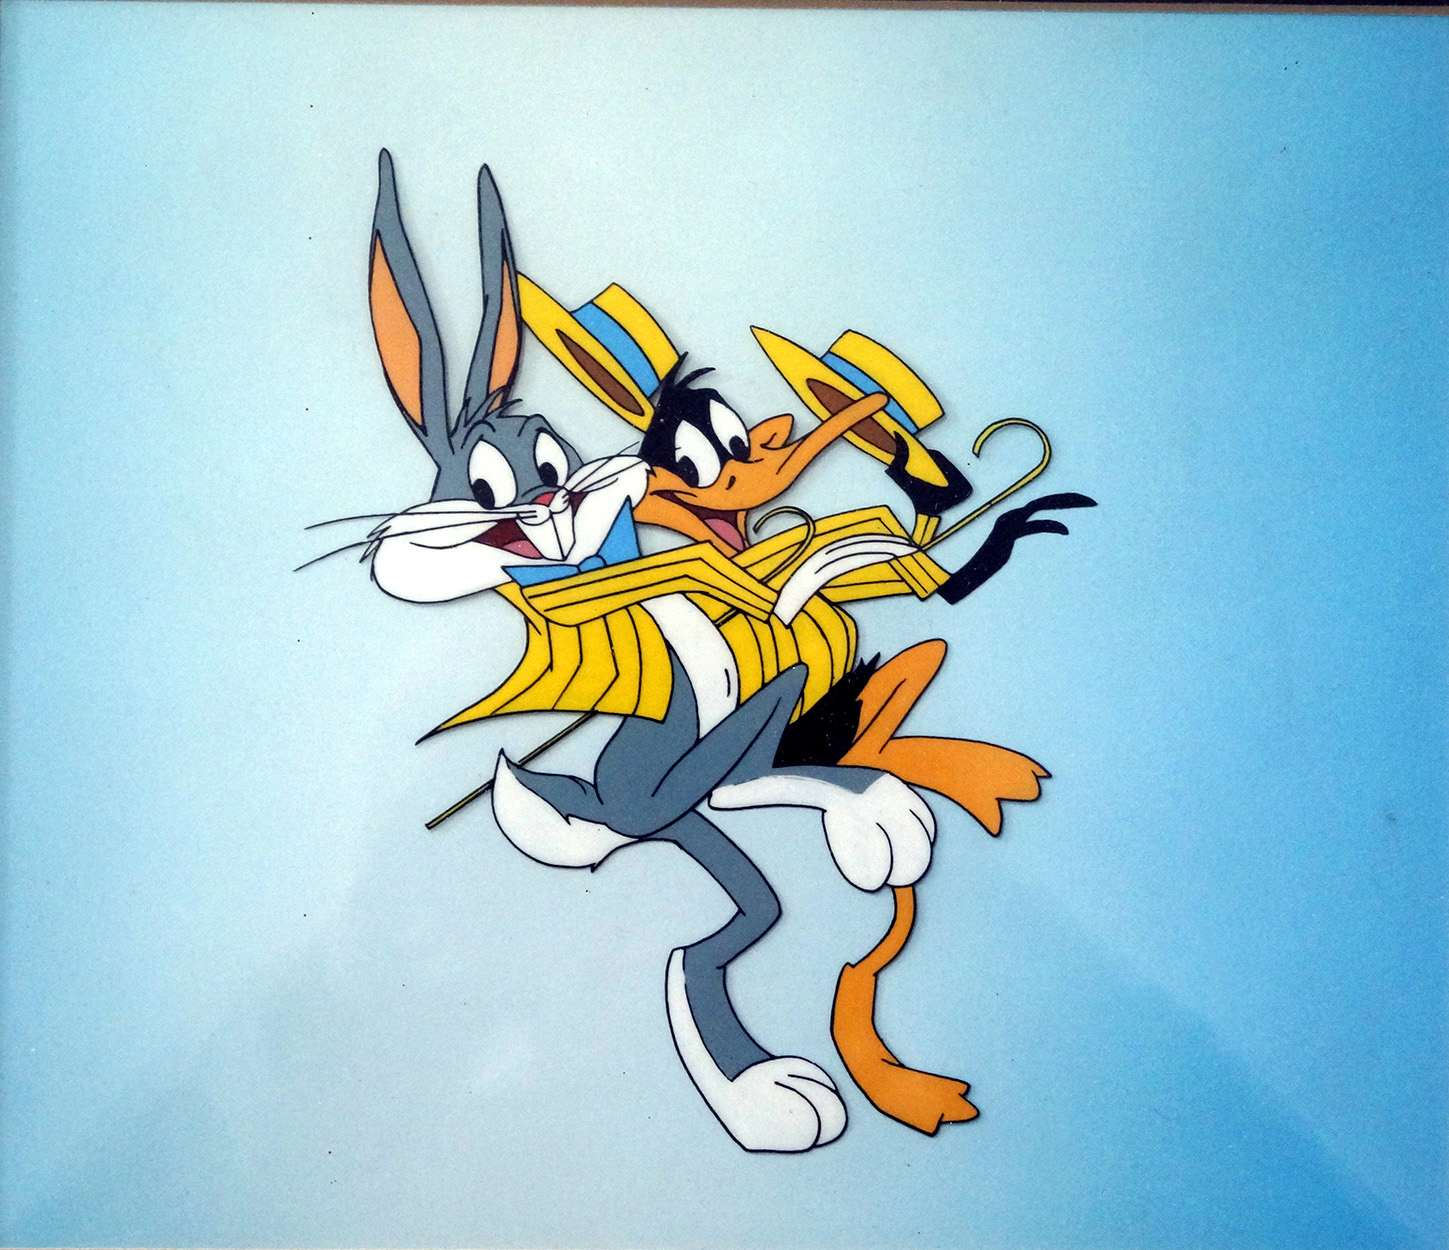 The Showstoppers. Bugs Bunny and Daffy Duck (Original) art by Warner Brothers at The Illustration Art Gallery